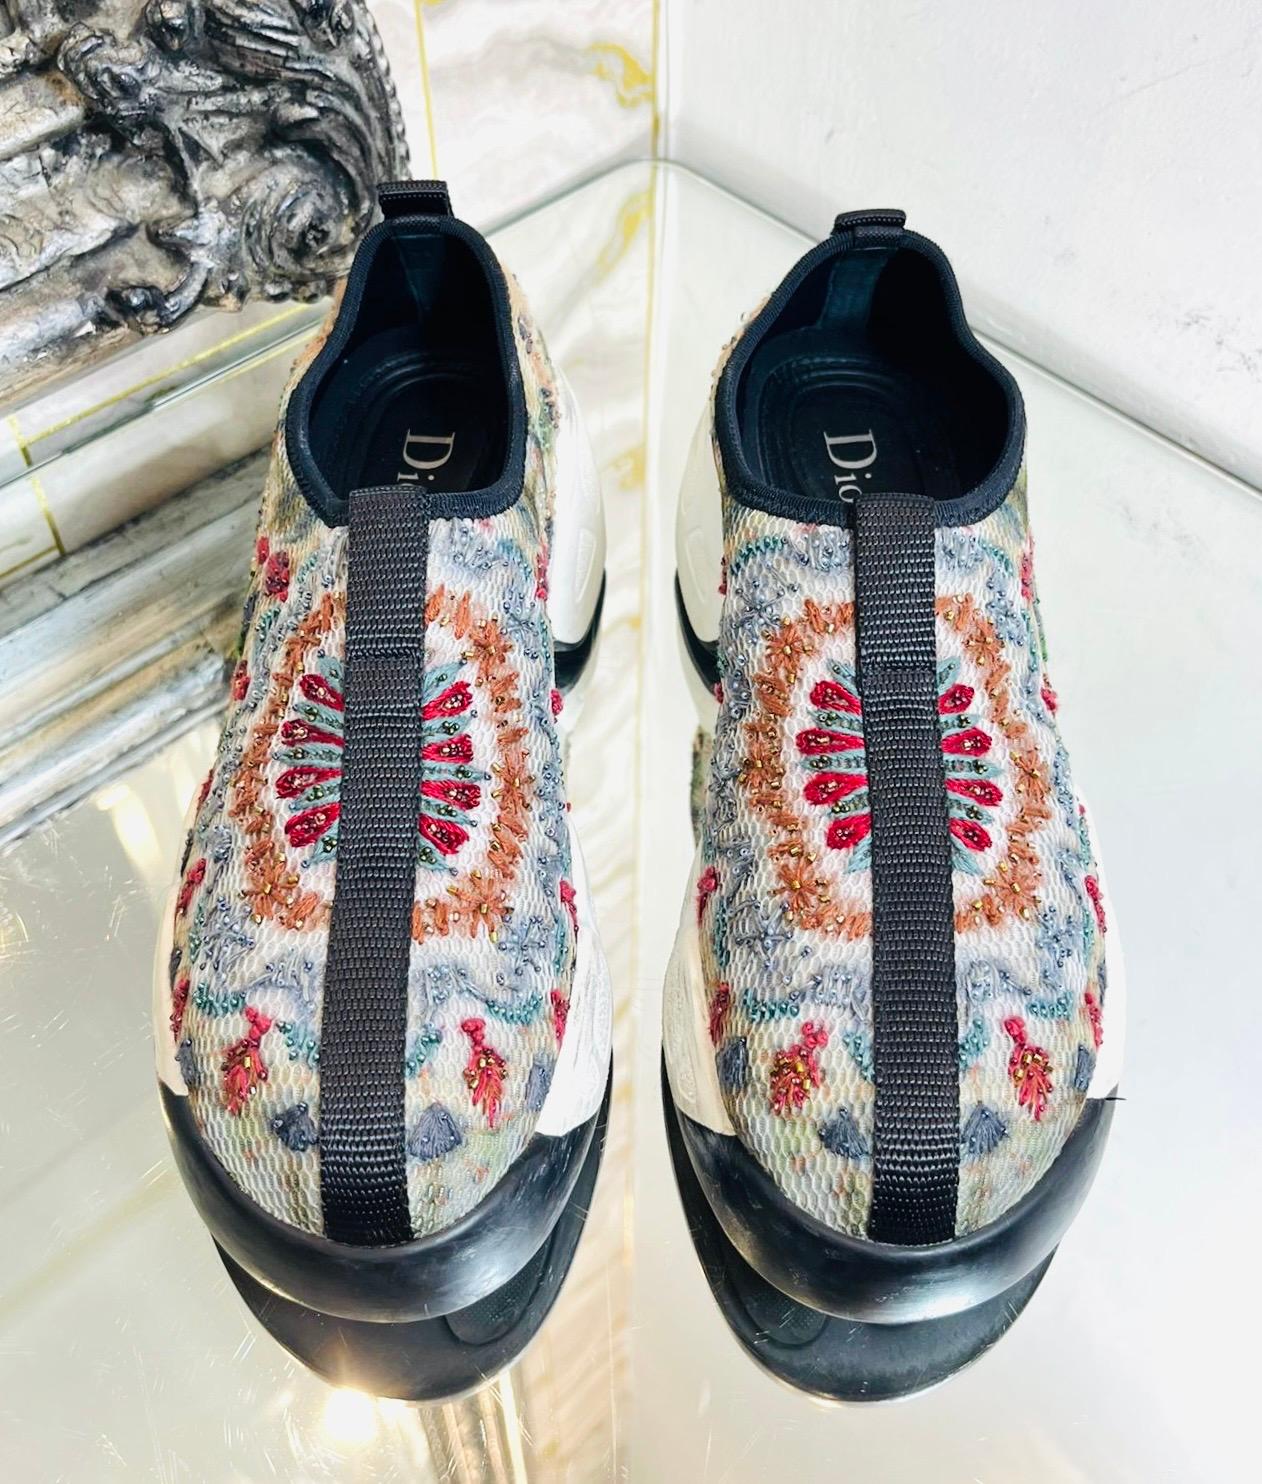 Dior Bead Embroidered Mesh Sneakers

Off-white slip-on sneakers designed with multicoloured, bead embellished embroideries.

Featuring 'Dior' engravement on a white rubber platform with black detailing to the toe and stripe through the centre.

Size